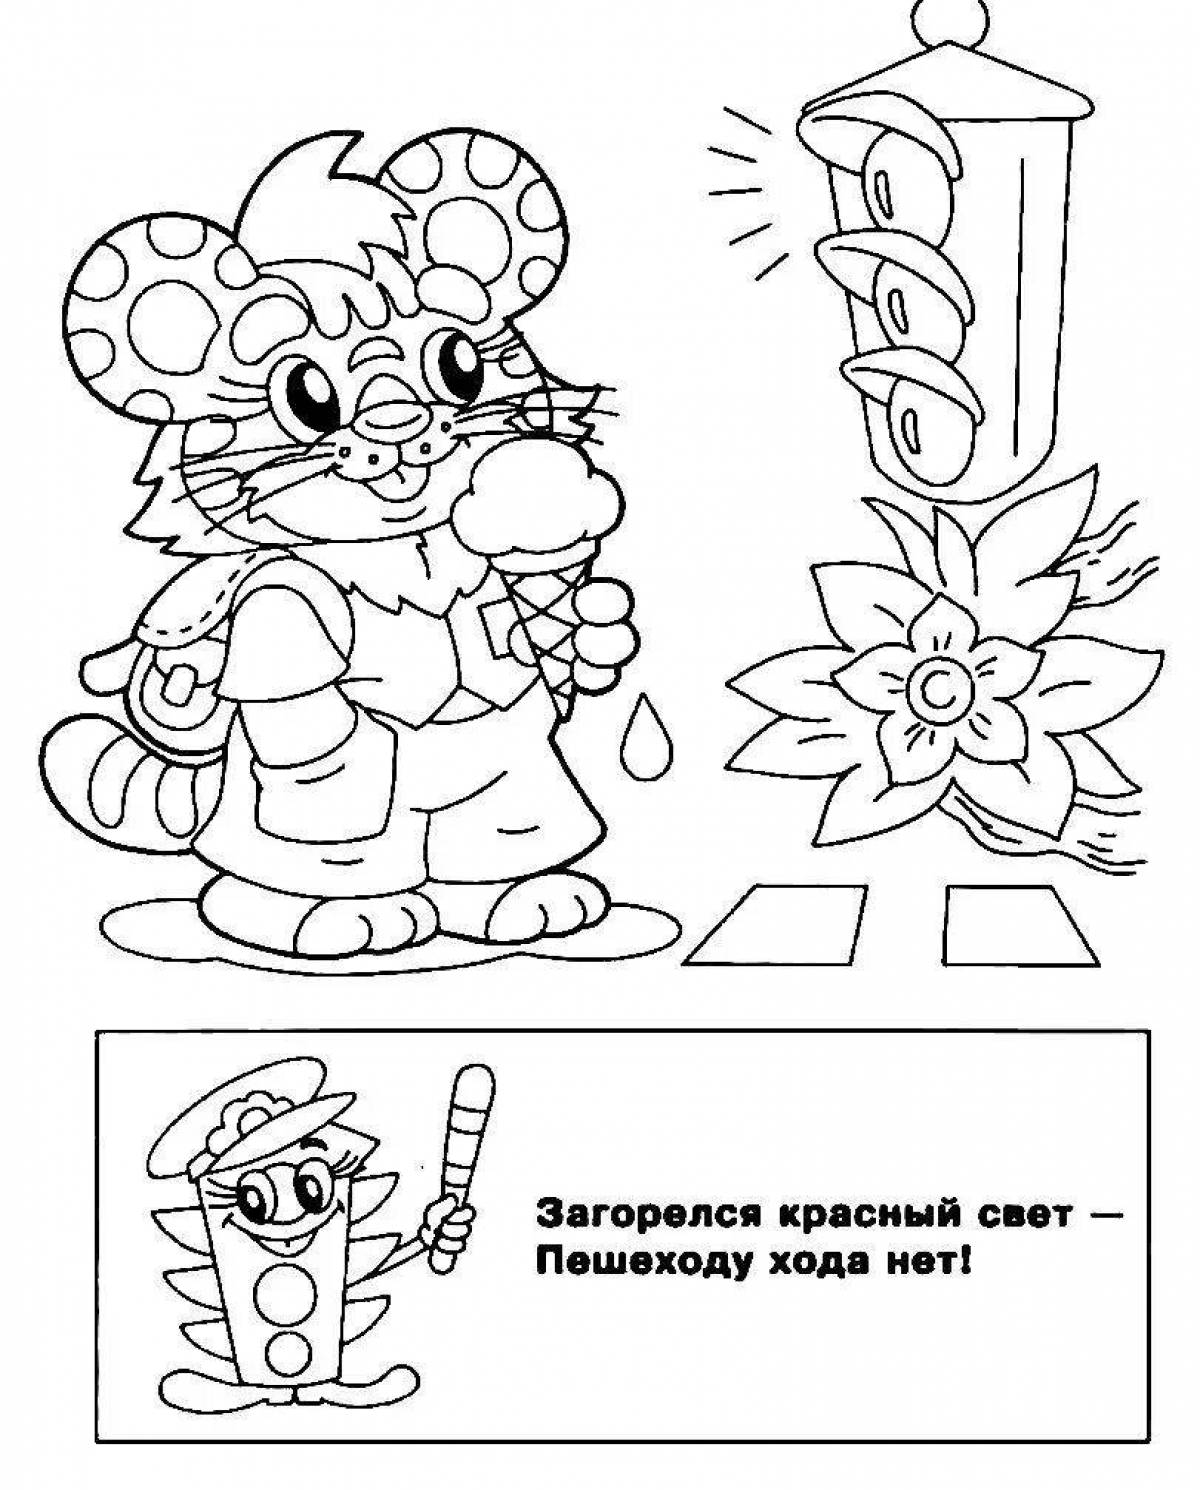 Colorful-color-explosive safety alphabet coloring book for kids